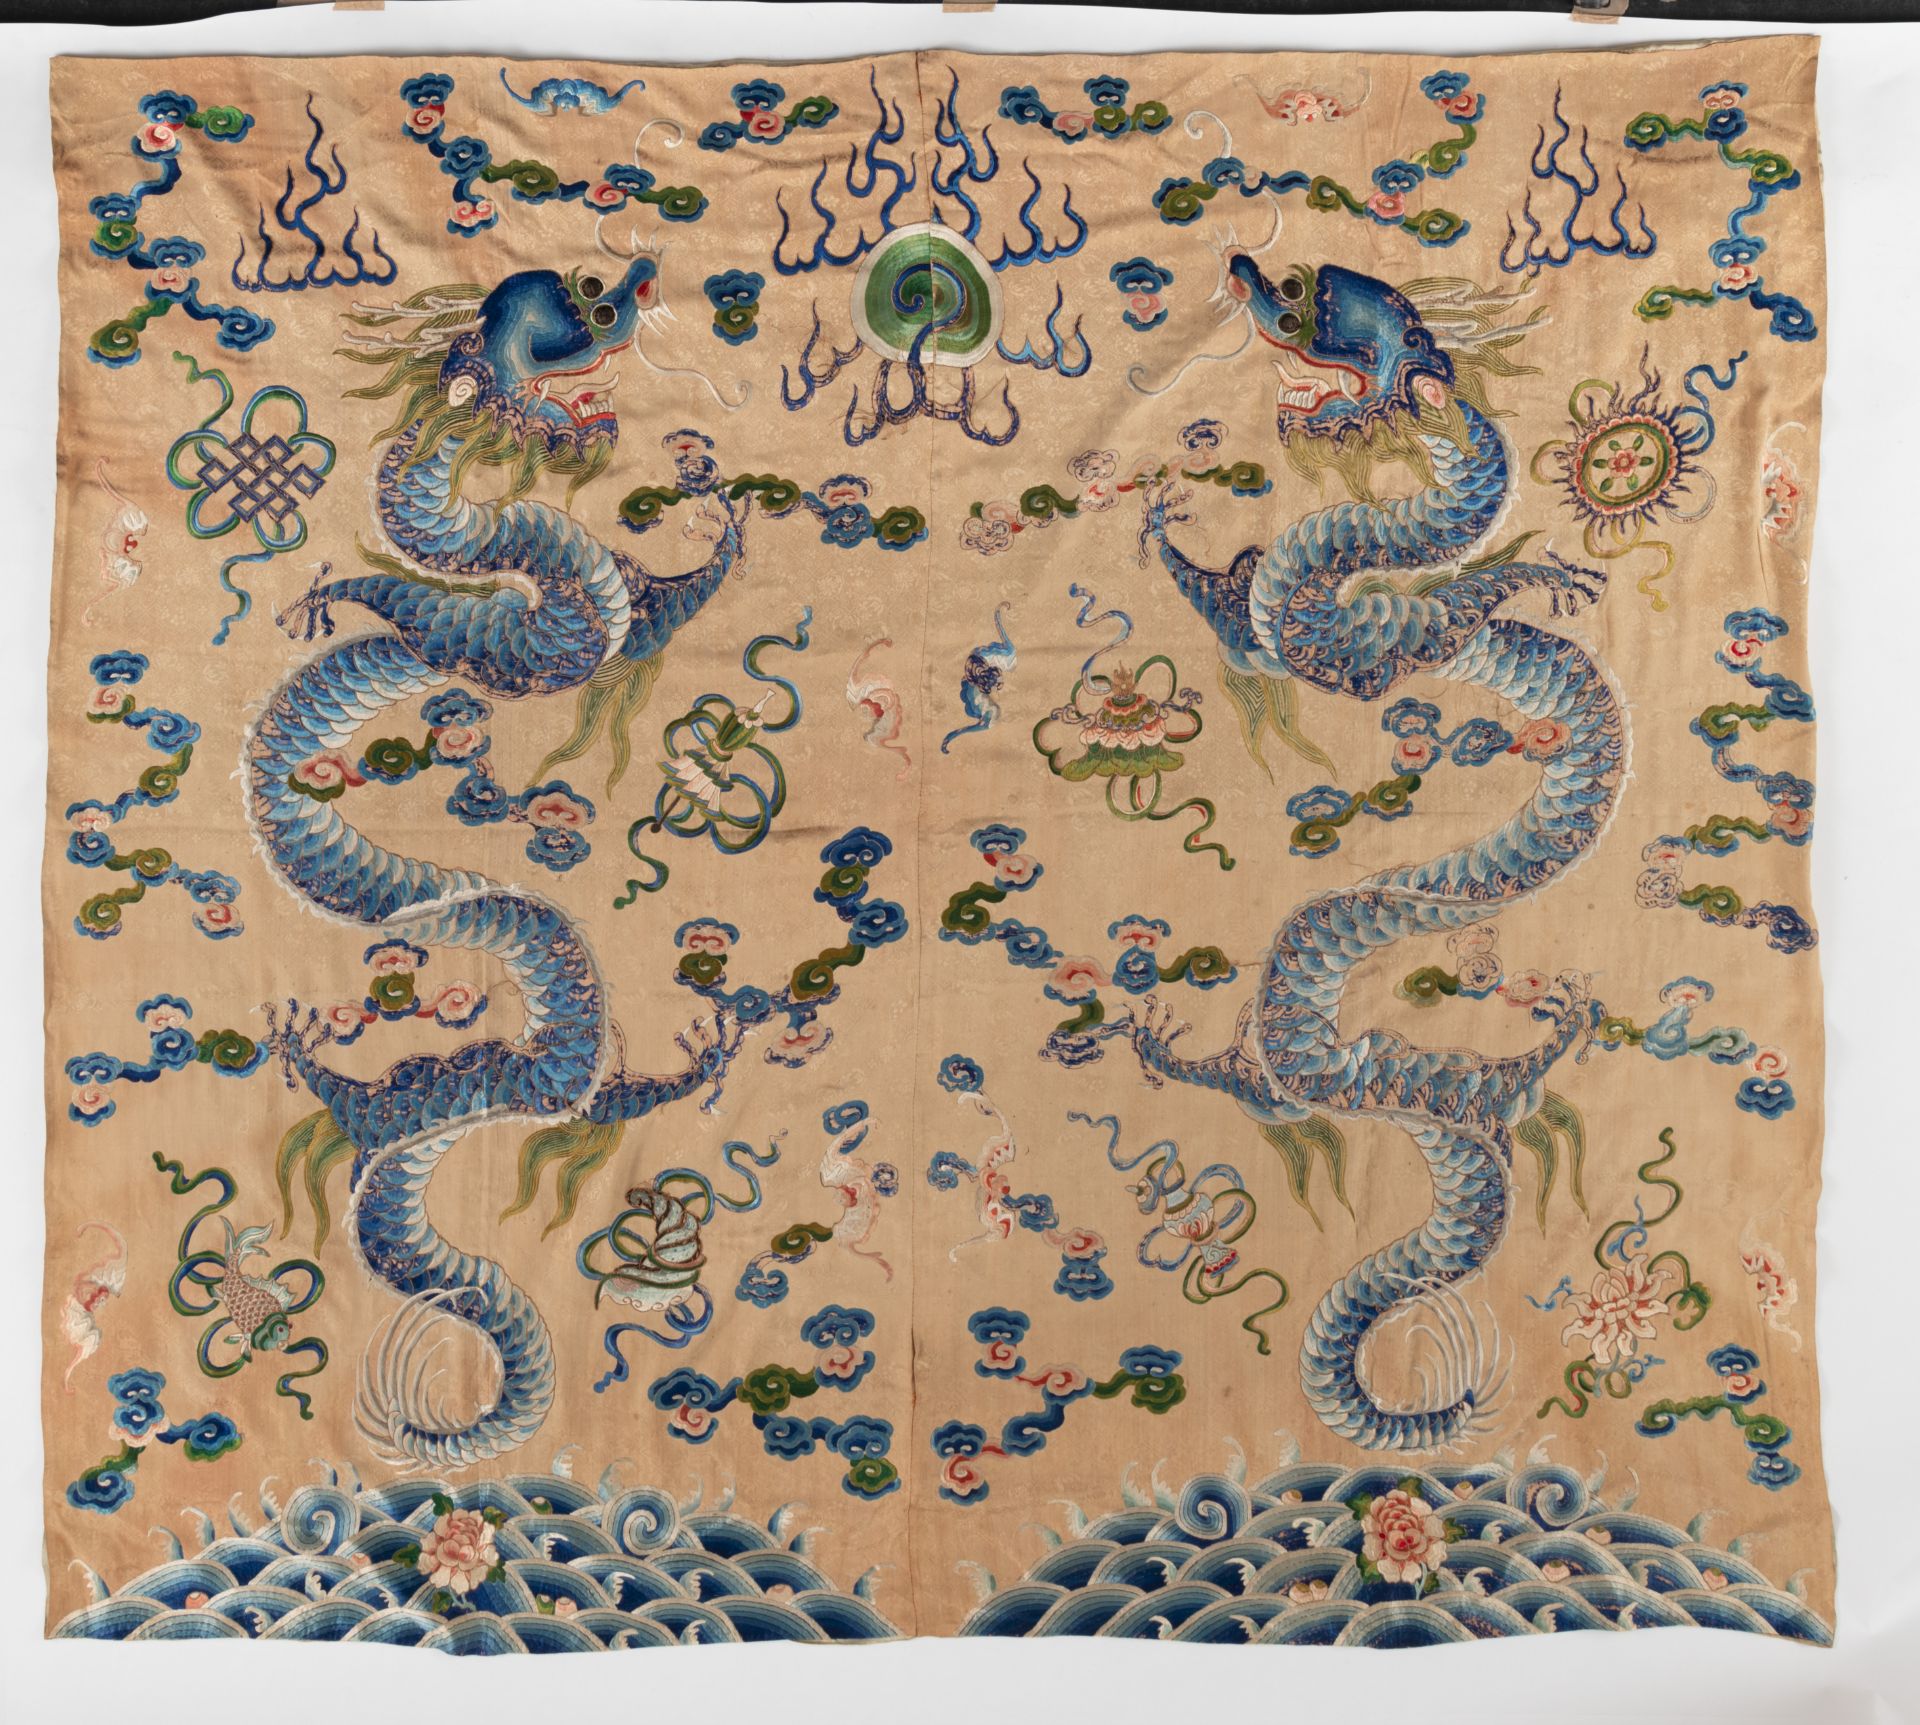 A LARGE BEIGE-GROUND SILK EMBROIDERY DEPICTING TWO IMPRESSIVE DRAGONS CHASING A FLAMING PEARL AND A